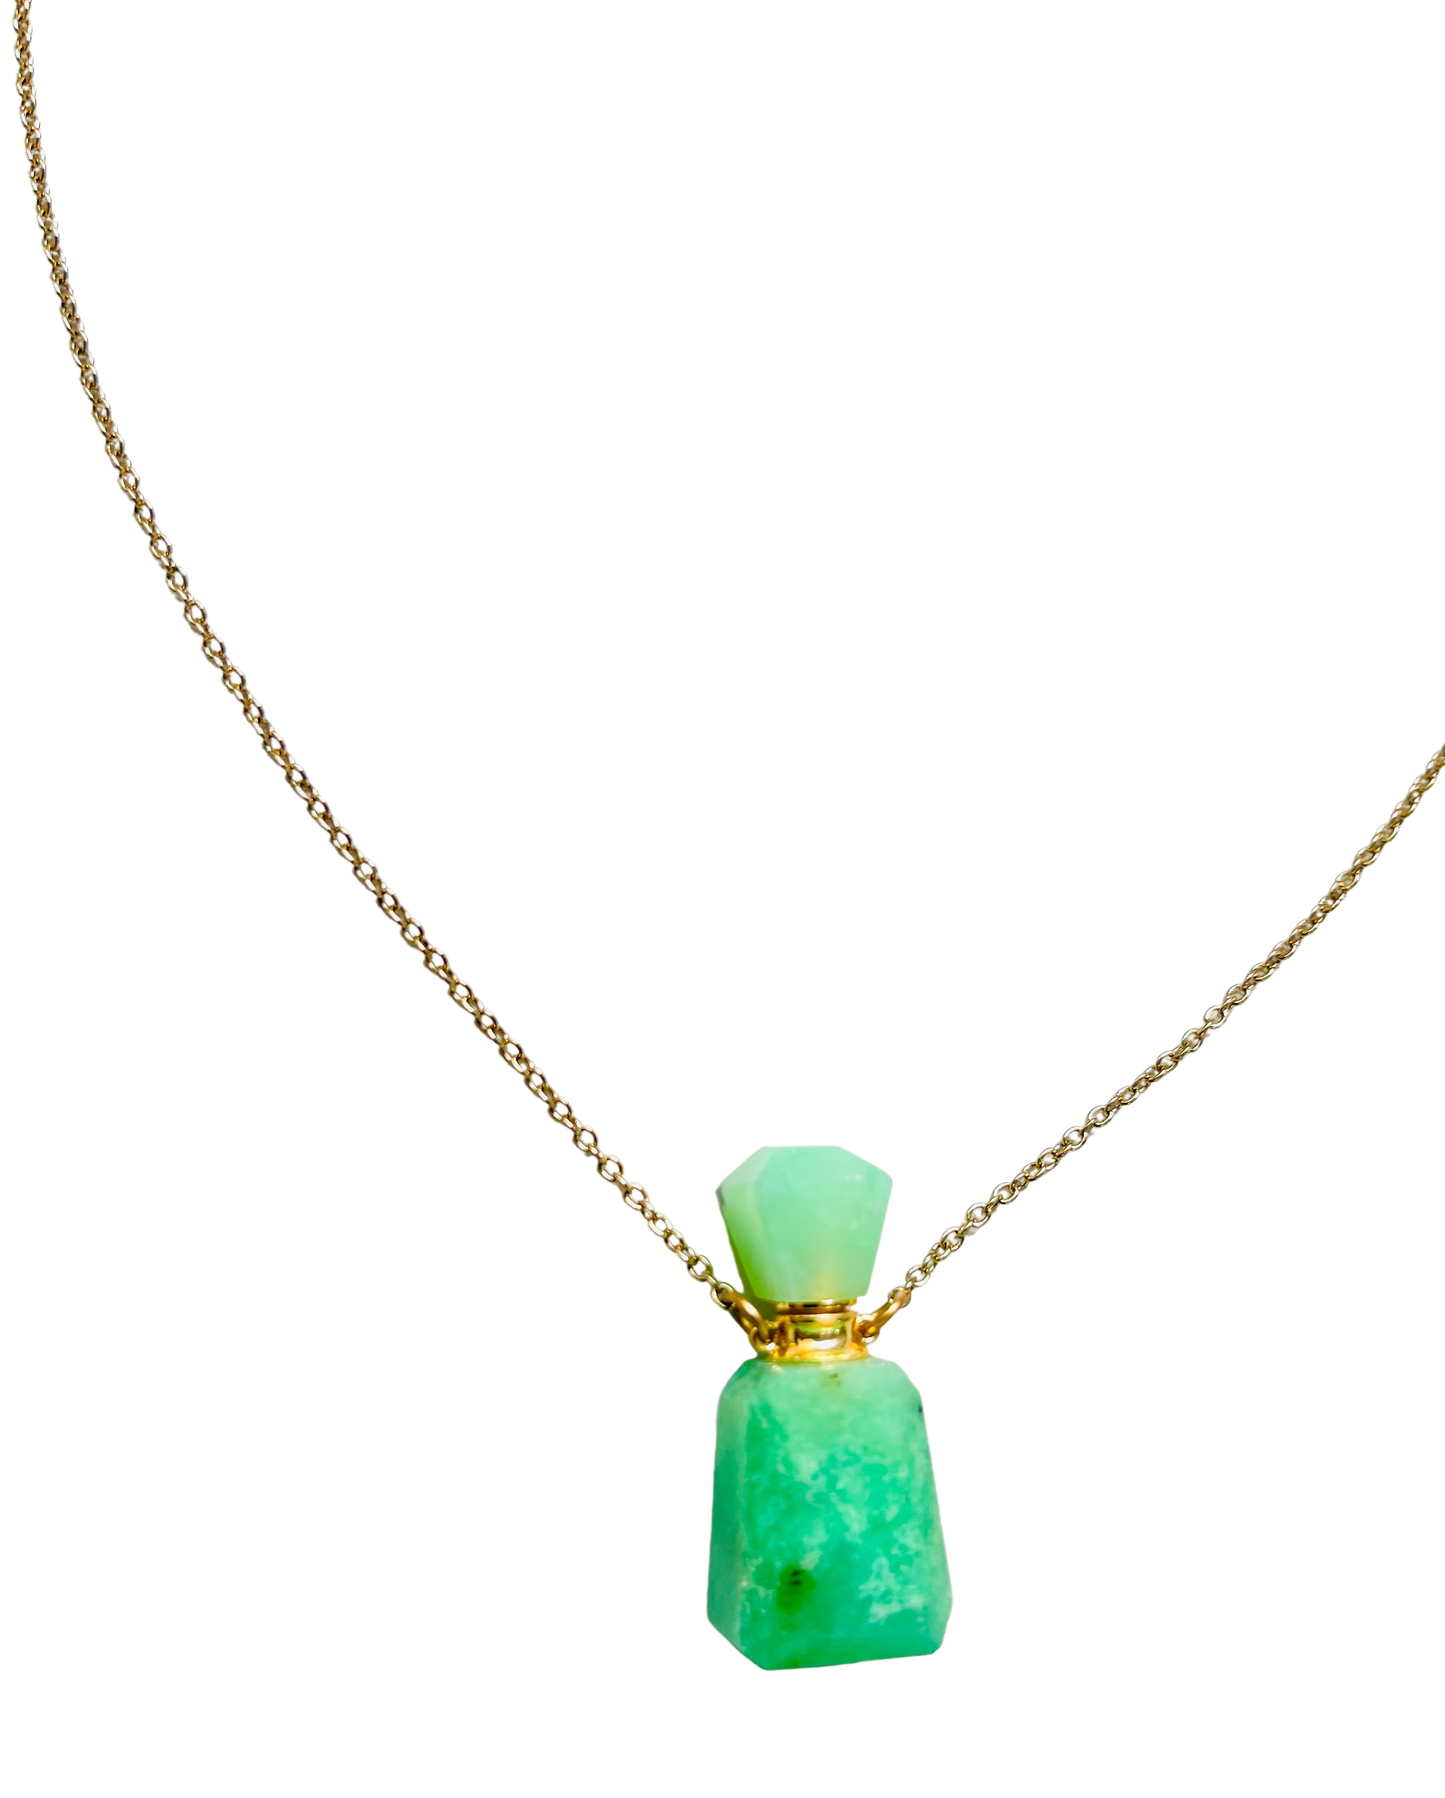 Green Chrysoprase Perfume Bottle Essential Oil Necklace